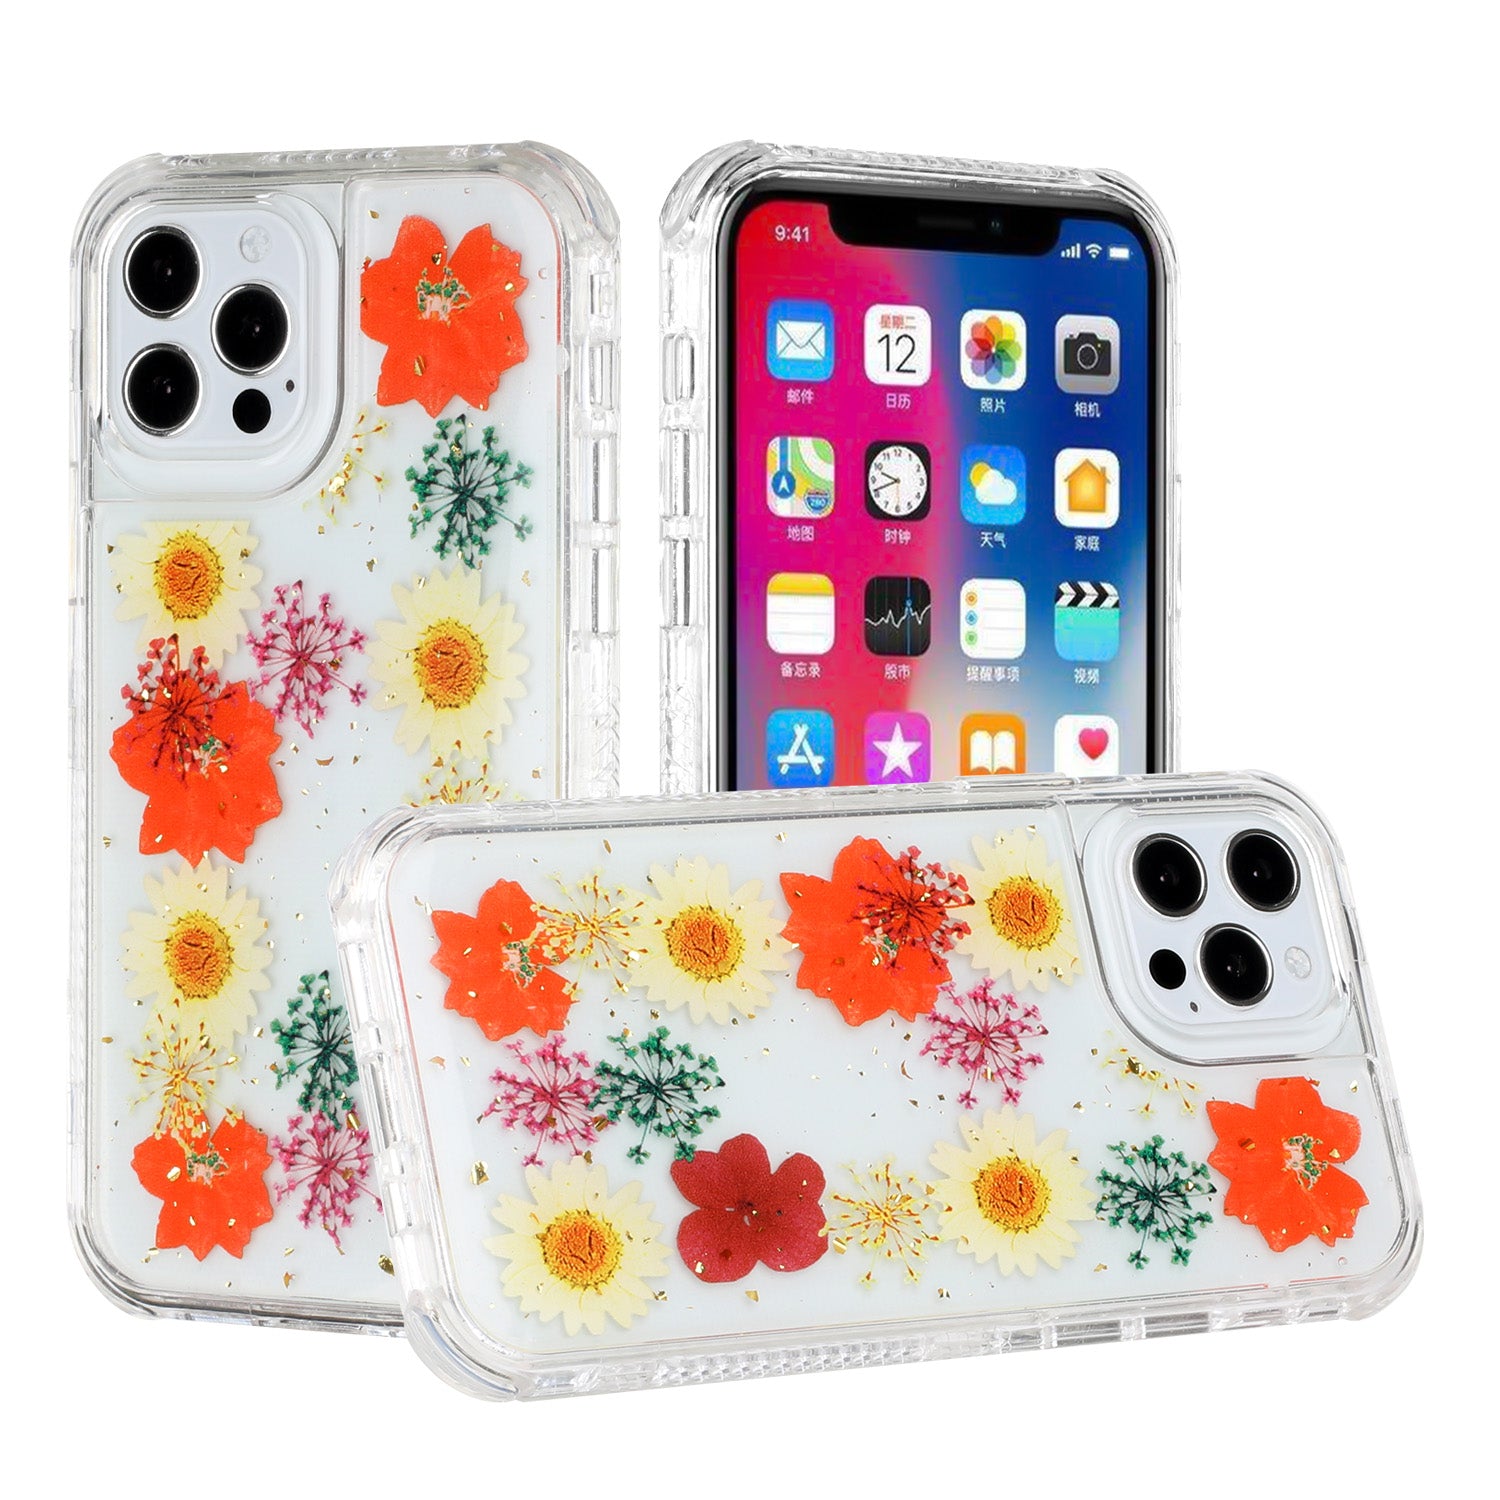 HRWireless, For iPhone 12/Pro (6.1 Only) Beautiful 3in1 Floral Epoxy Design Hybrid Case Cover